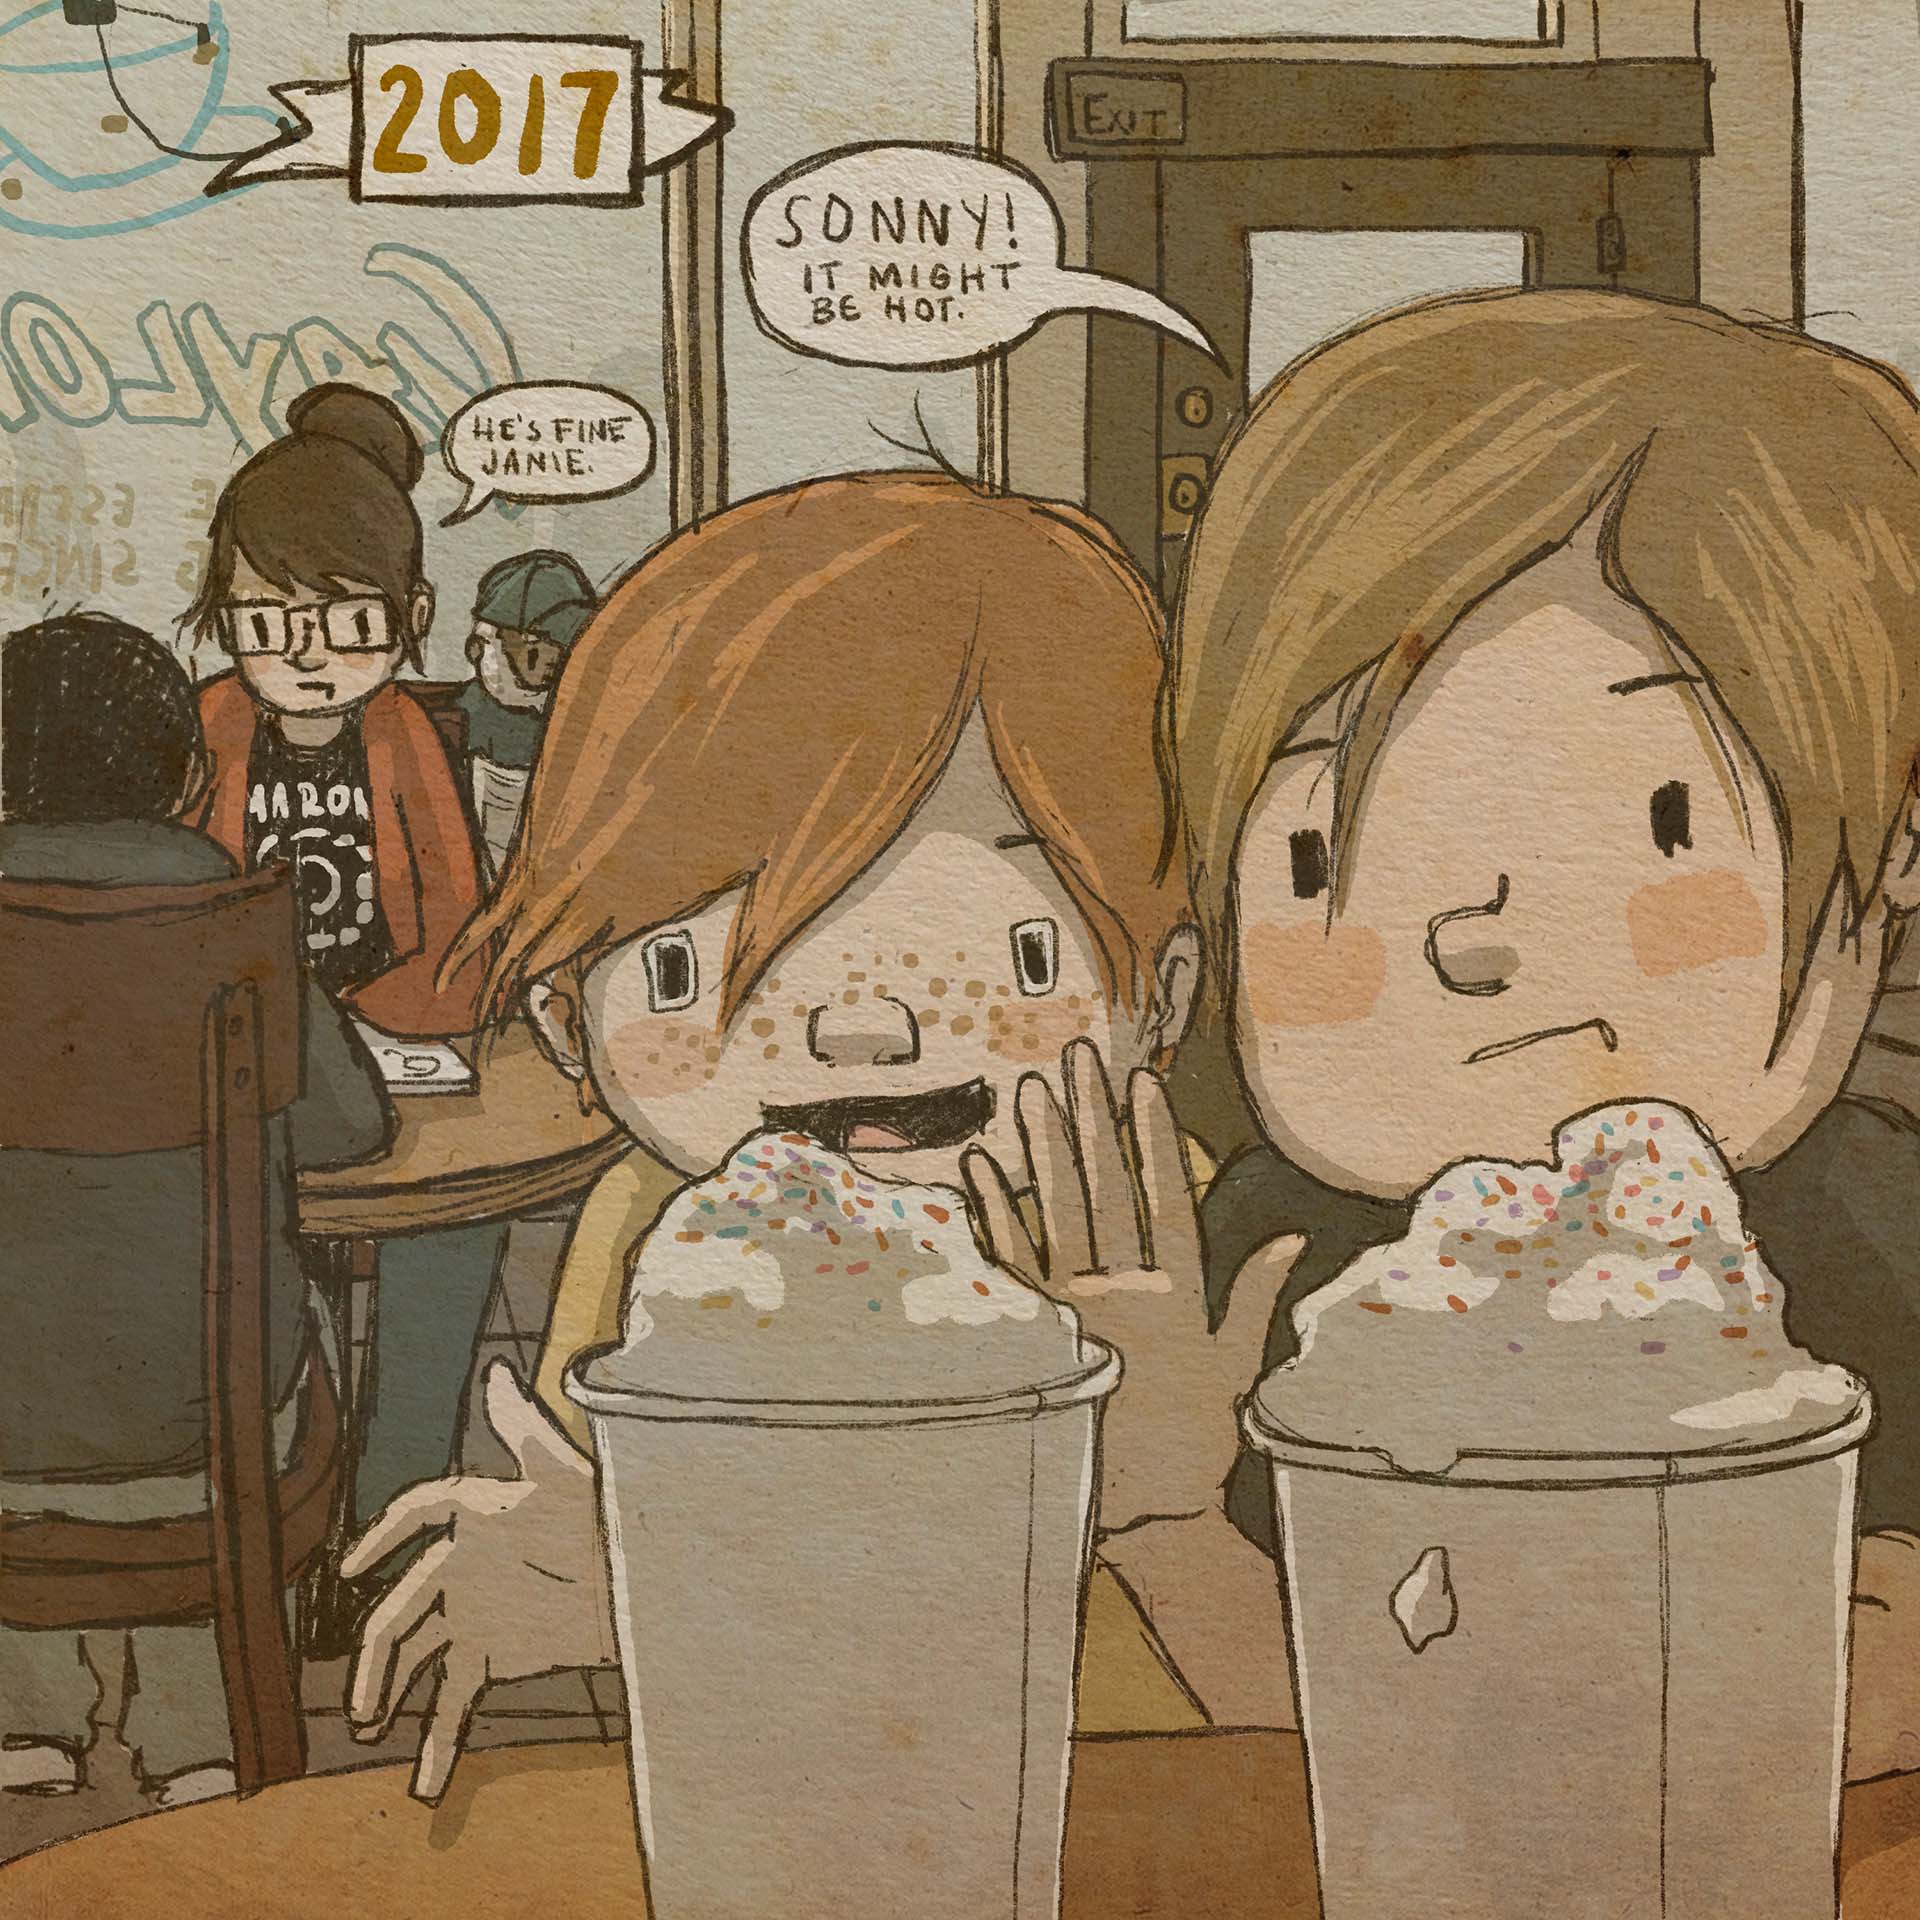 2017: Two kids — the younger one with red hair and freckles — sit in front of what appear to be cups of hot chocolate topped with giant mounds of whipped cream and sprinkles. The older sister says, "Sonny! It might be hot." Briana, older now with glasses and her hair in a bun, sits at the same table across from Thien, still drawing. "He's fine, Janie," she says.